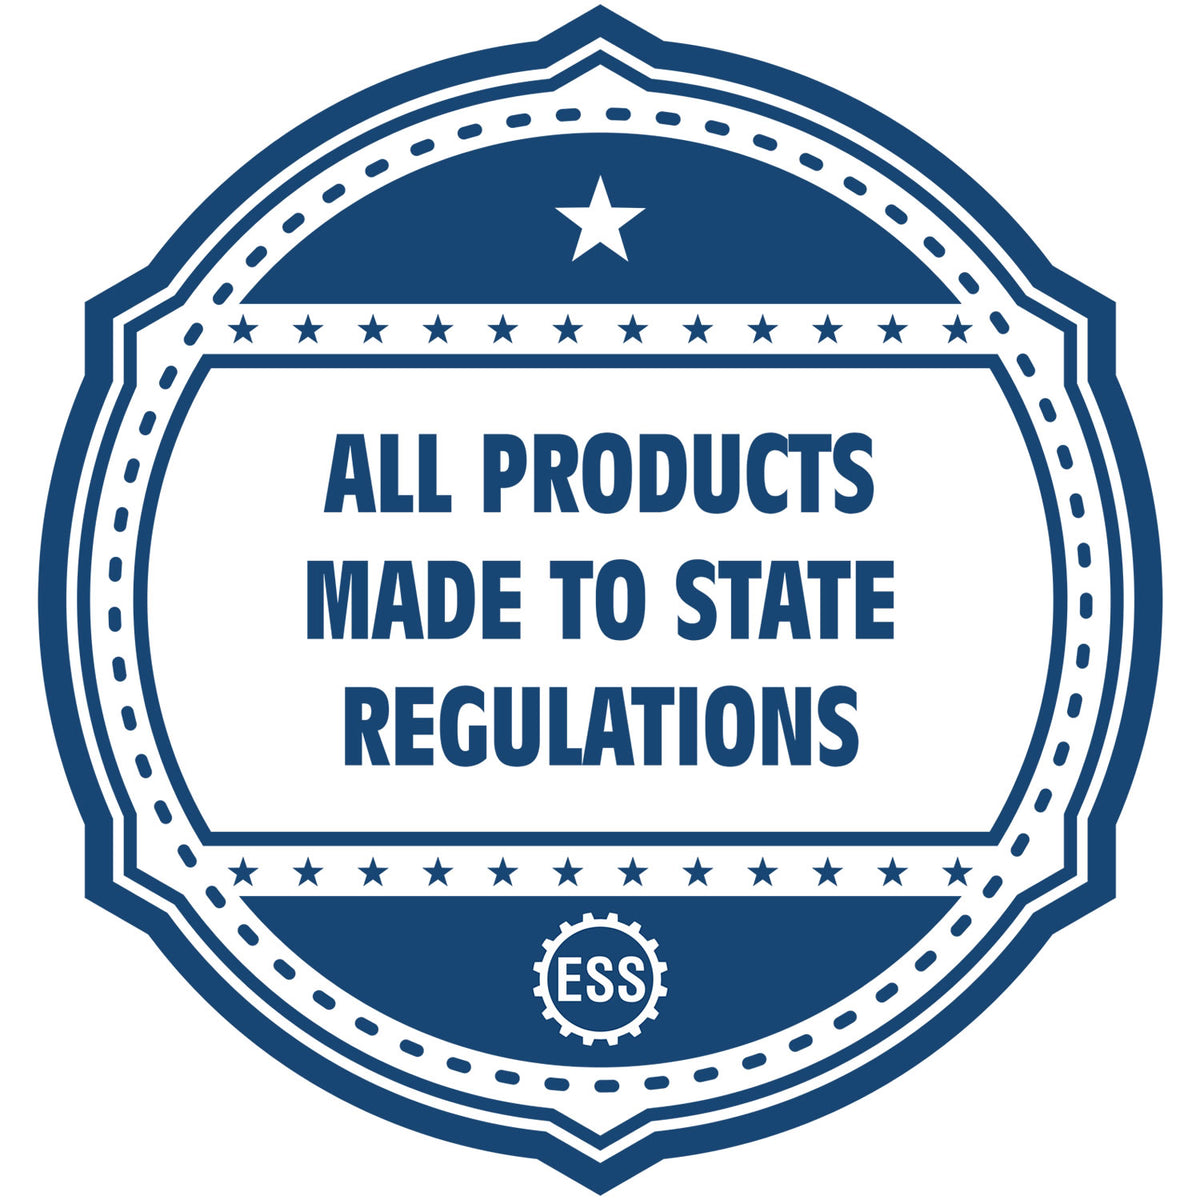 An icon or badge element for the Slim Pre-Inked Hawaii Architect Seal Stamp showing that this product is made in compliance with state regulations.